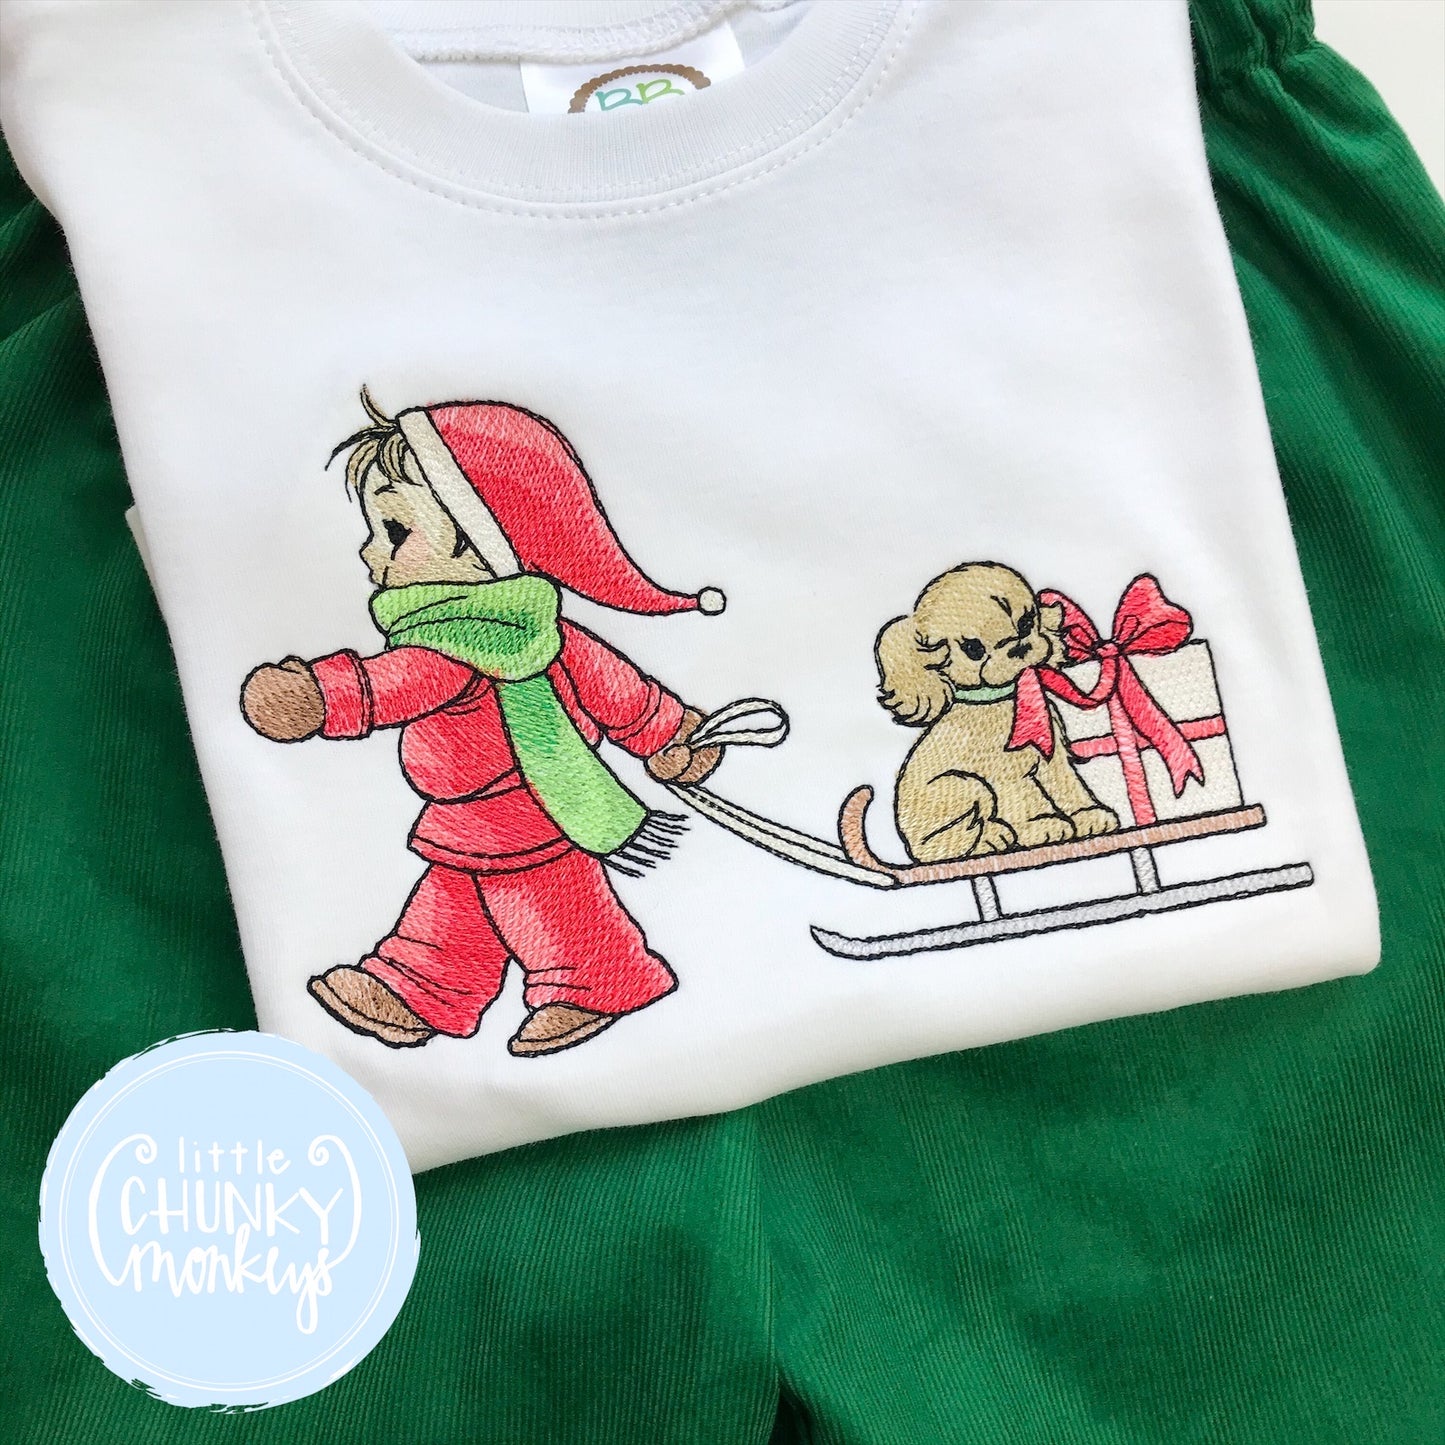 Shirt - Child pulling a dog in a sled